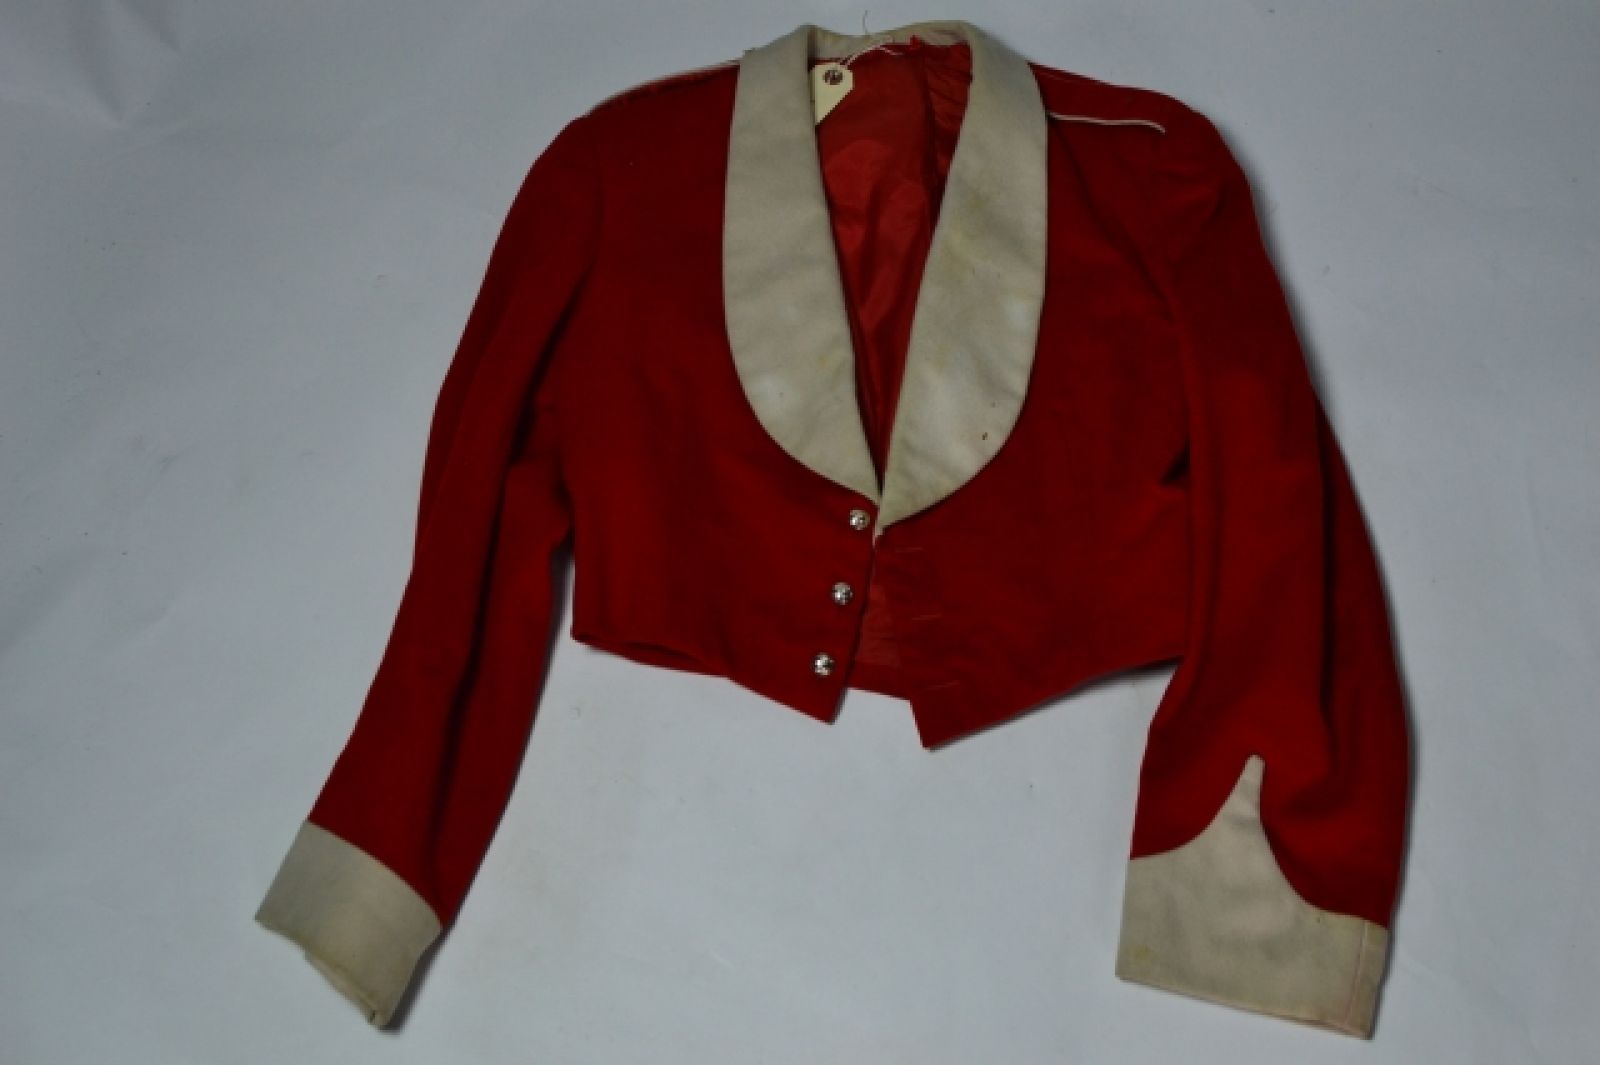 Post 1953 Officers Mess Jacket